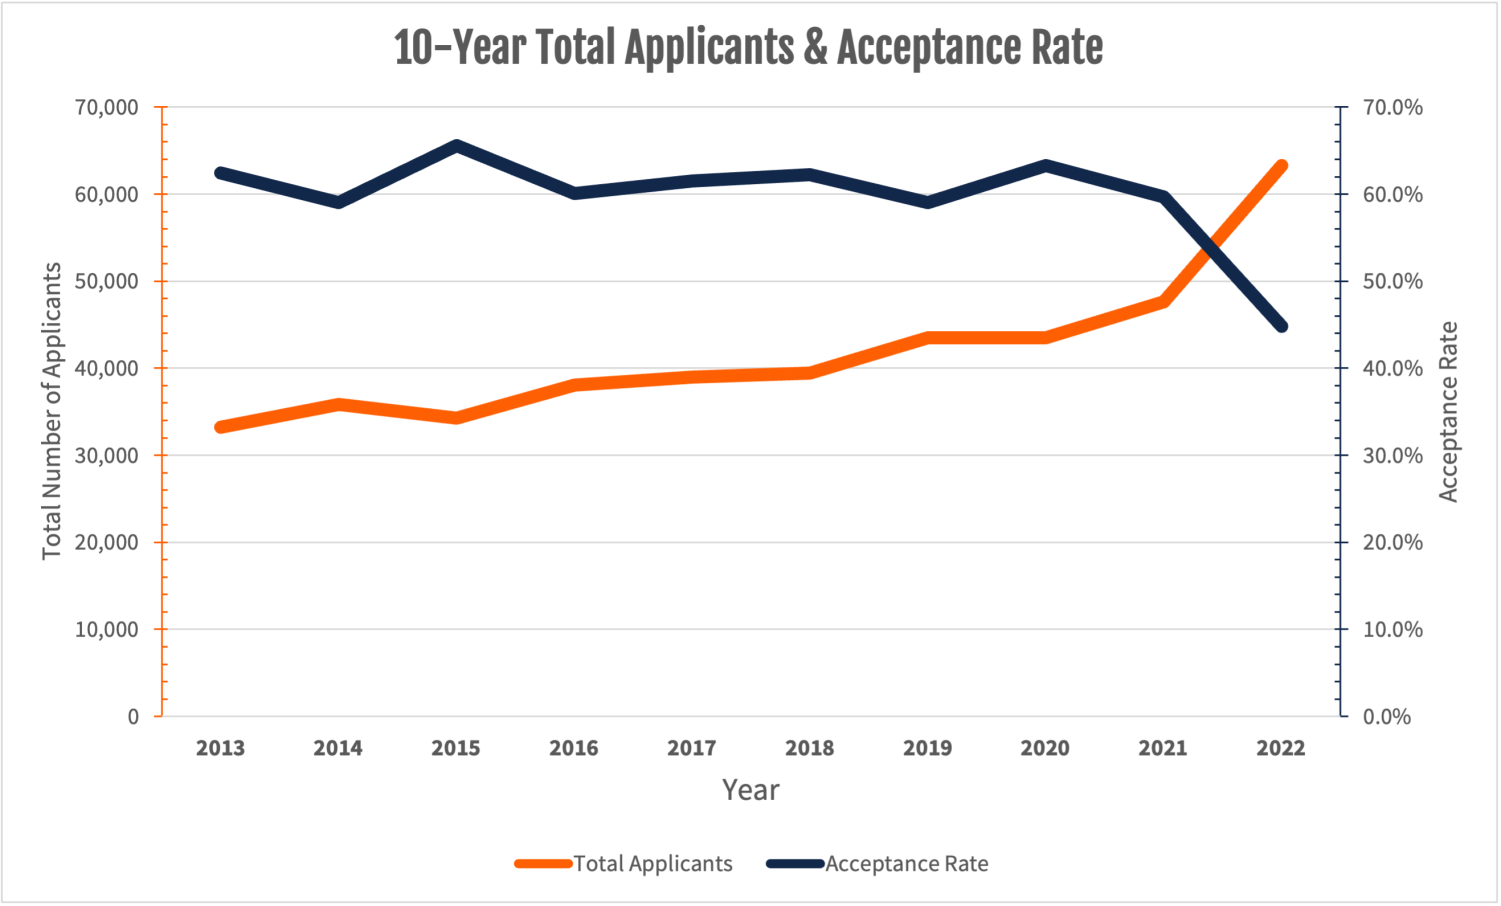 UI Acceptance Rate Drops To Lowest On Record As Number Of Applicants Rises The Daily Illini